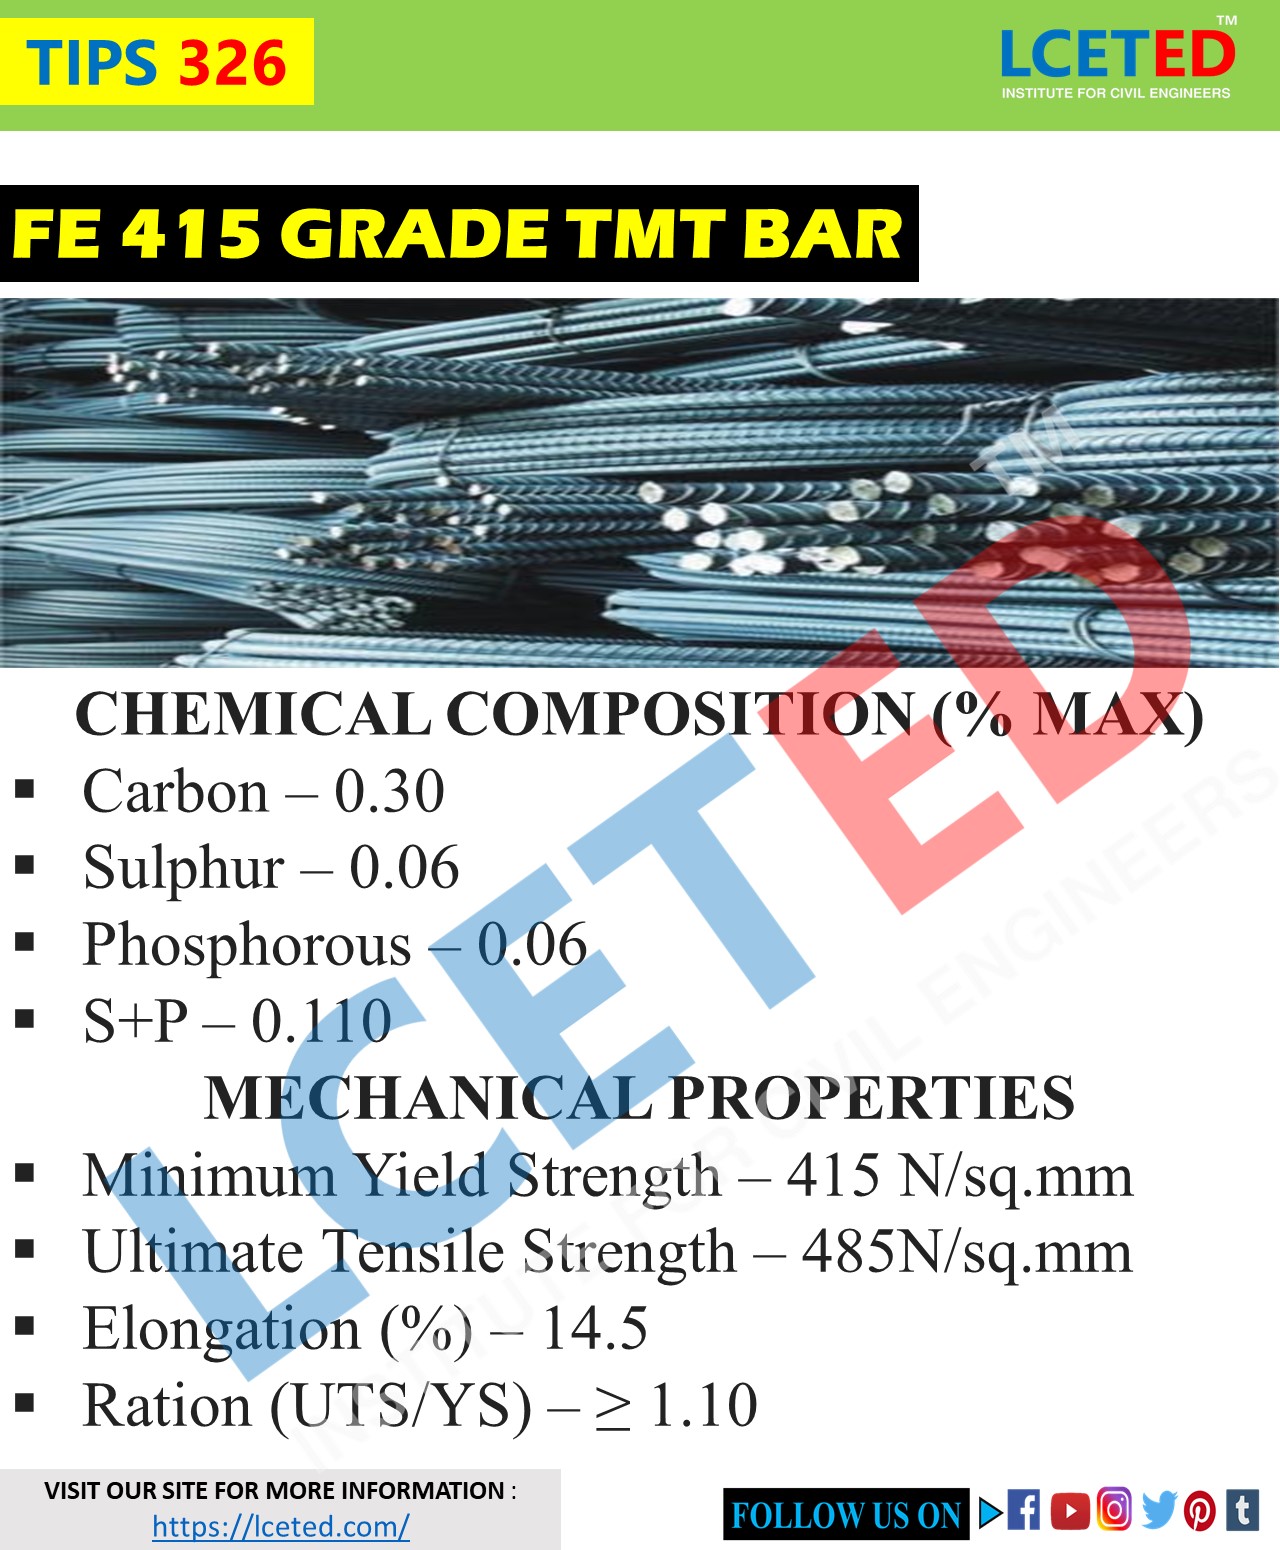 CHEMICAL COMPOSITION & MECHANICAL PROPERTIES OF FE415